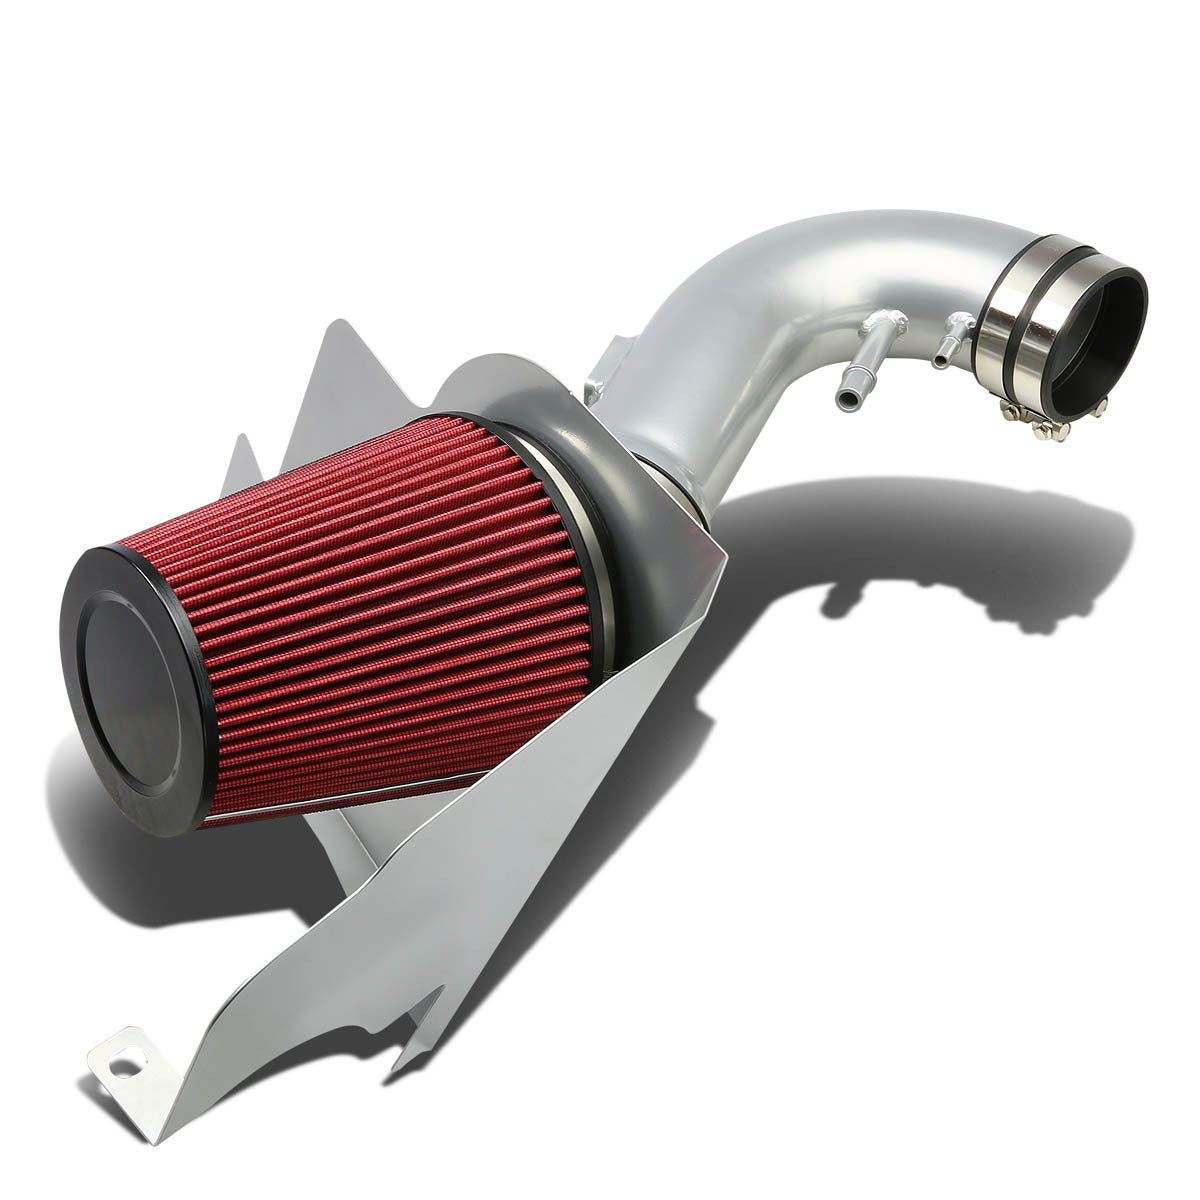 11-14 Ford Mustang 5.0L V8 Aluminum Cold Air Intake w/Heat Shield+Cone Filter